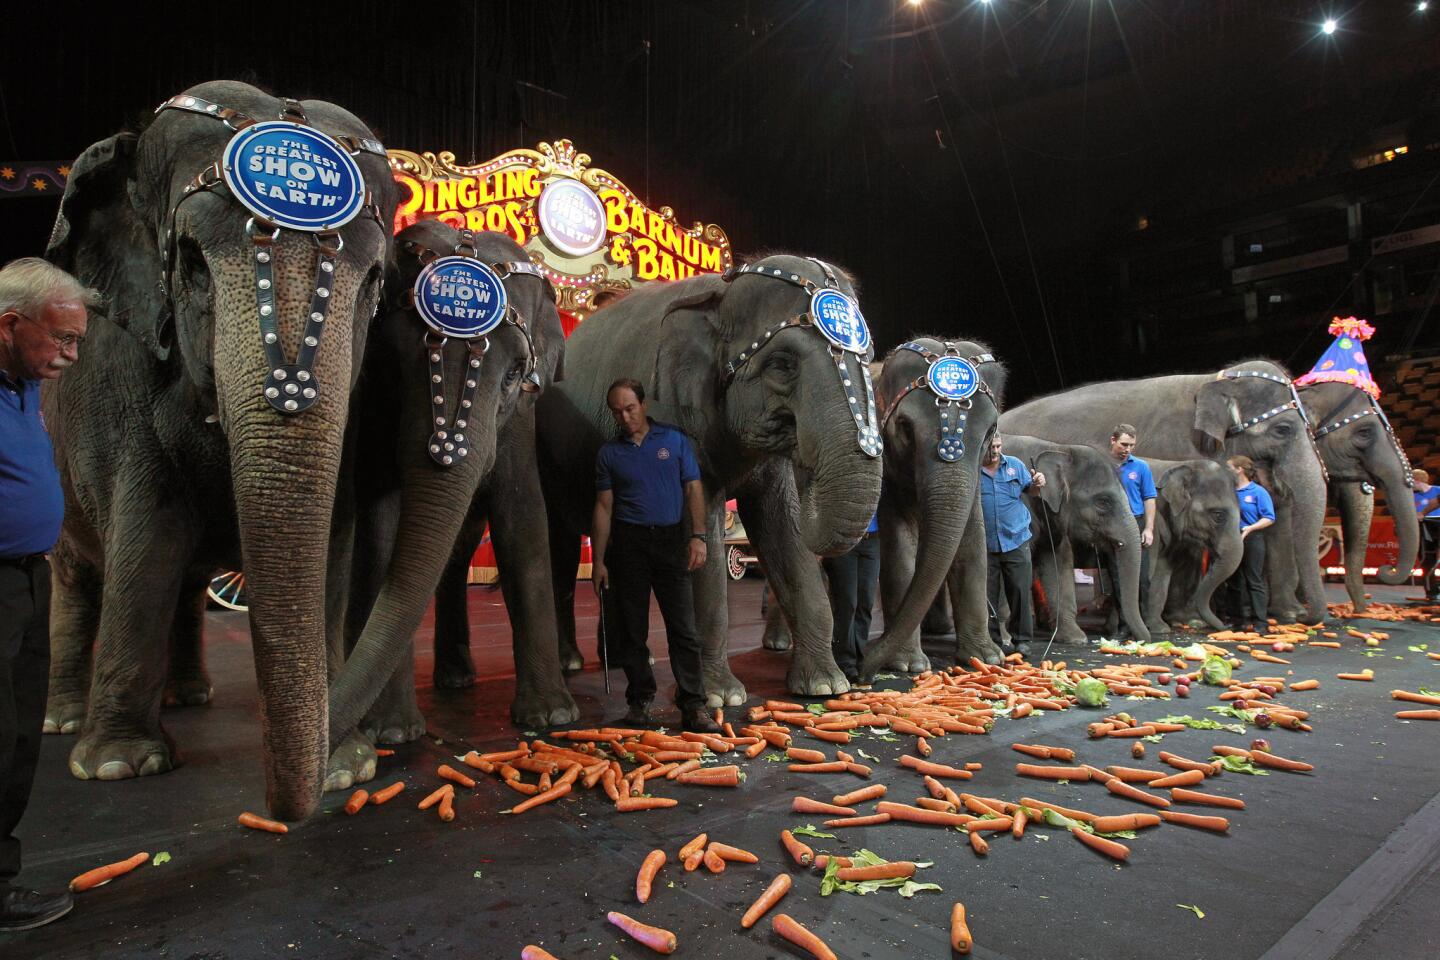 Bonnie the Elephant, far right with hat, celebrated her 17th birthday as she and other elephants from the Ringling Brothers Circus had their traditional Brunch on the TD Garden event floor.